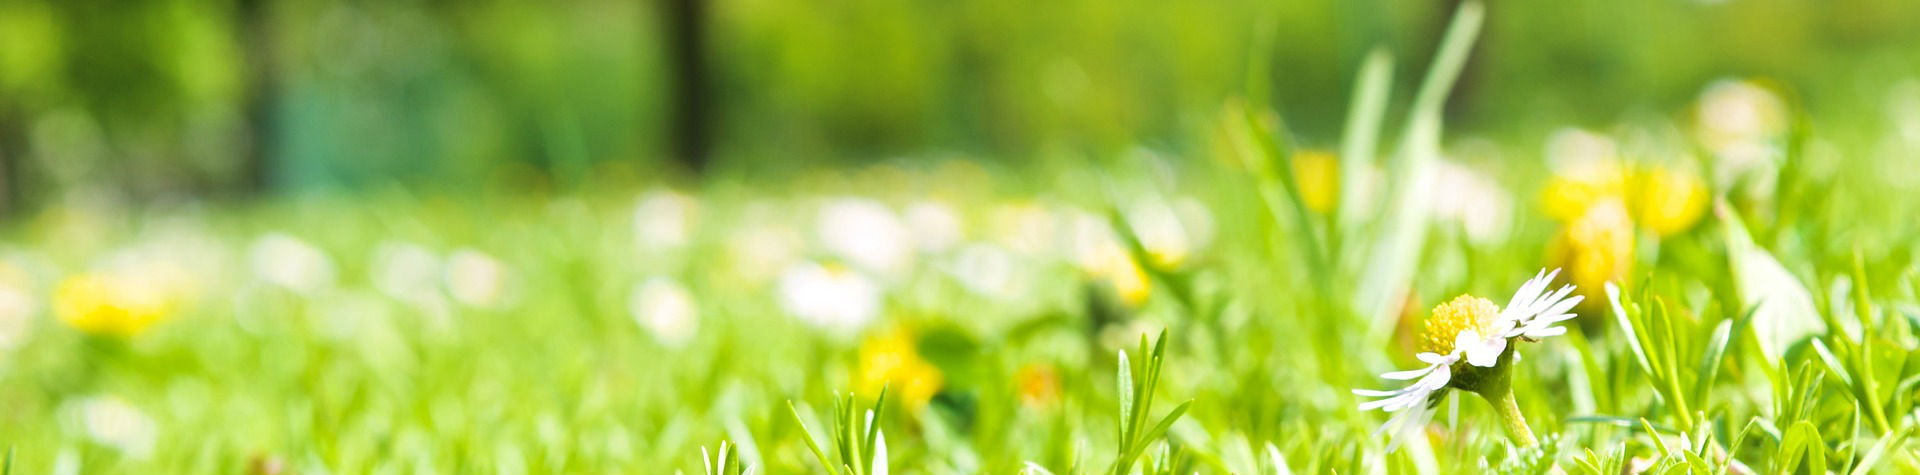 Image of a daisy in the grass